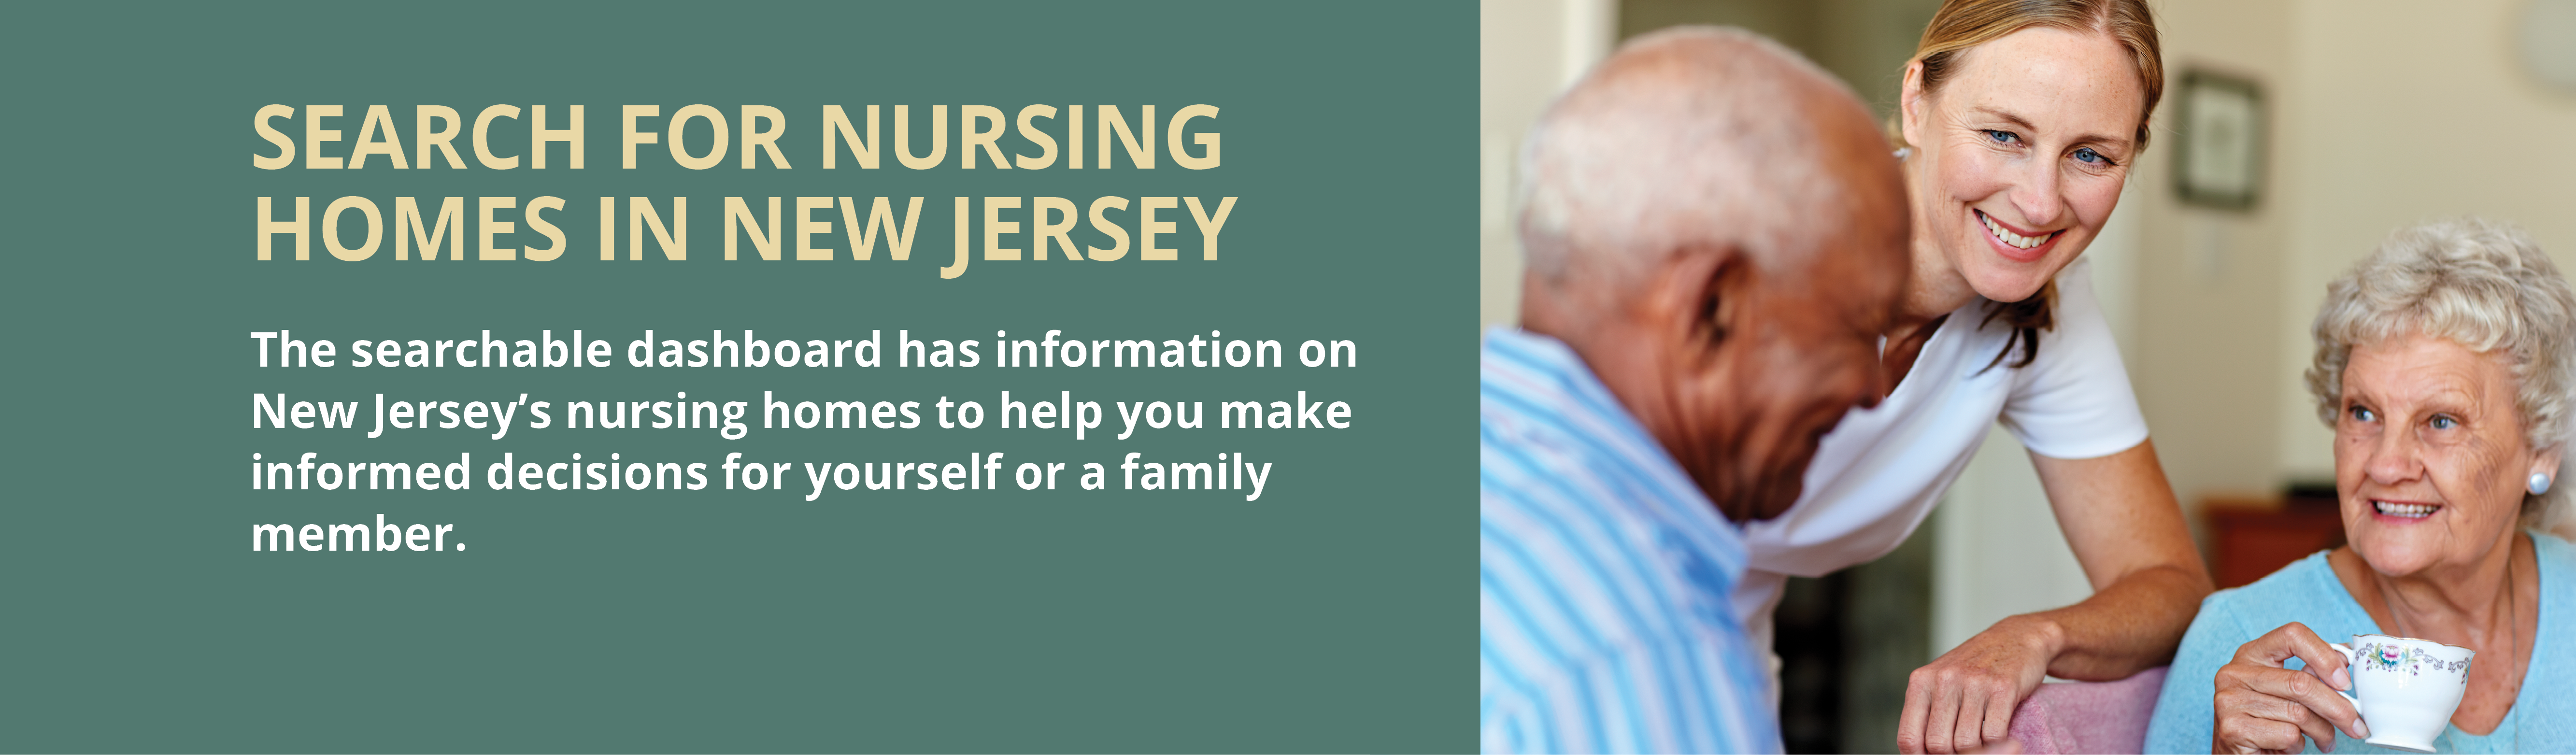 Search for nursing homes in New Jersey. The searchable dashboard has information on New Jersey's nursing homes to help you make informed decisions for yourself or a family member.